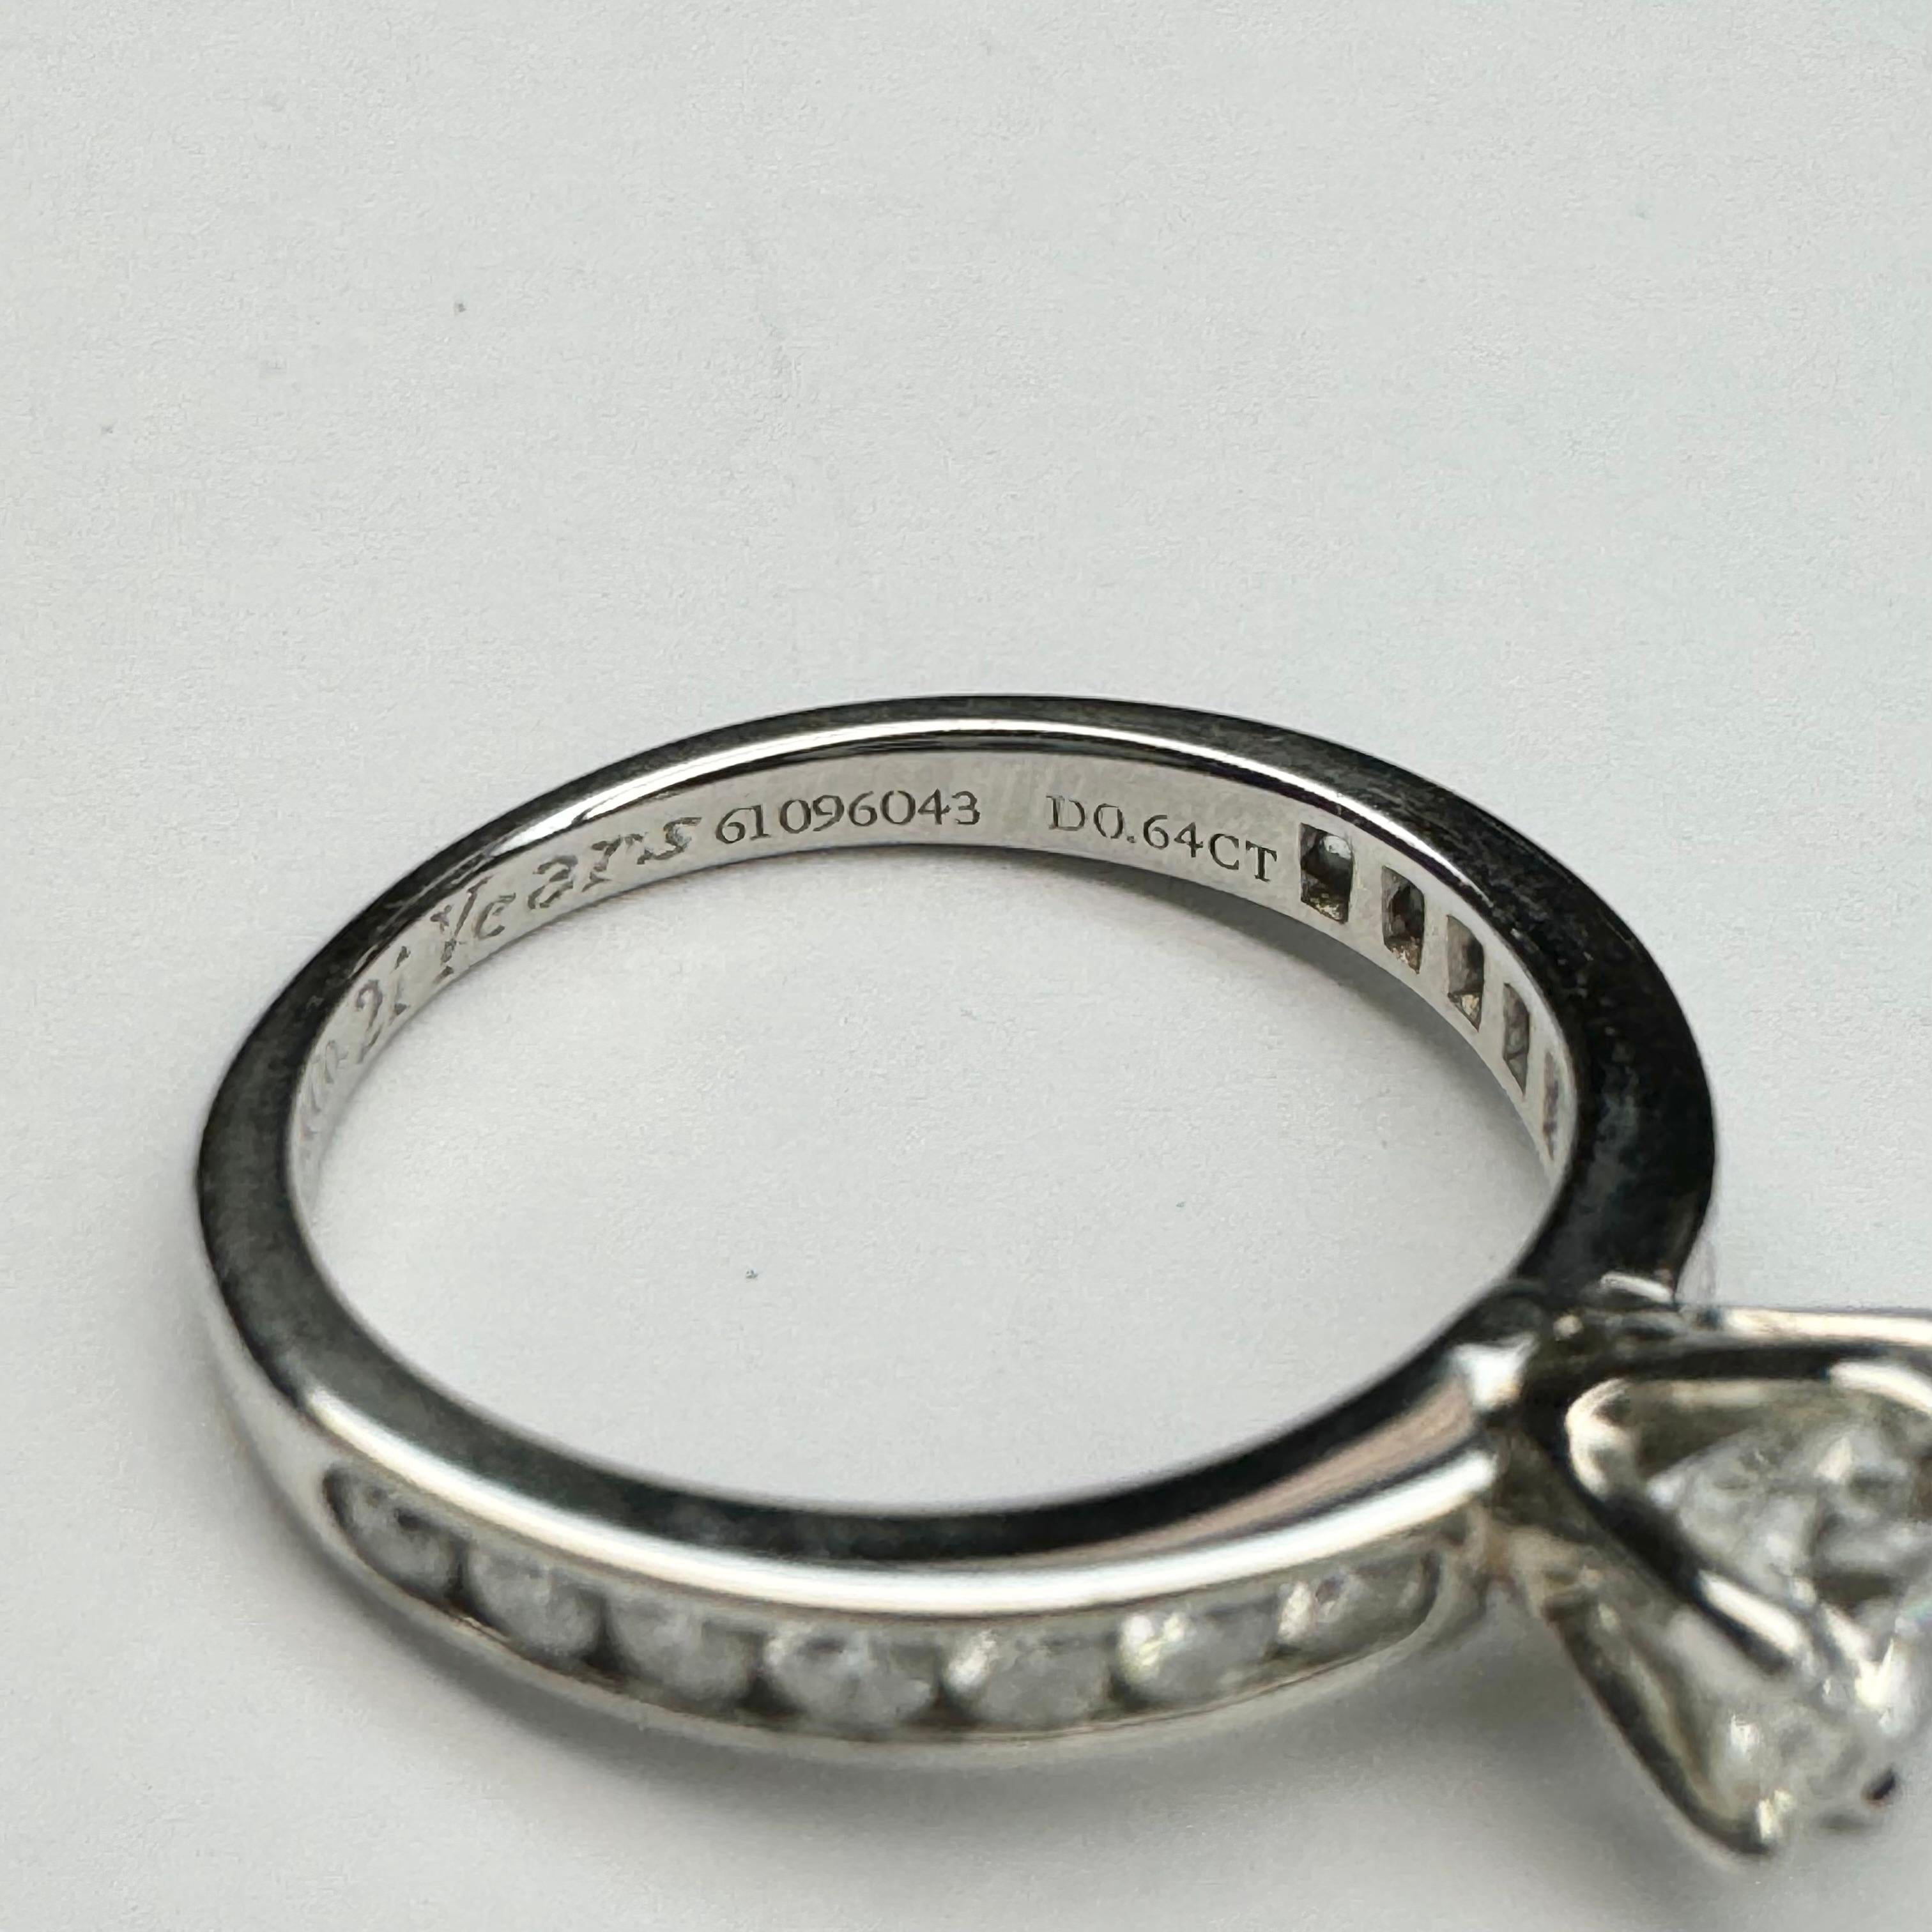 Tiffany & Co. 0.64ct Diamond Ring For Sale 6